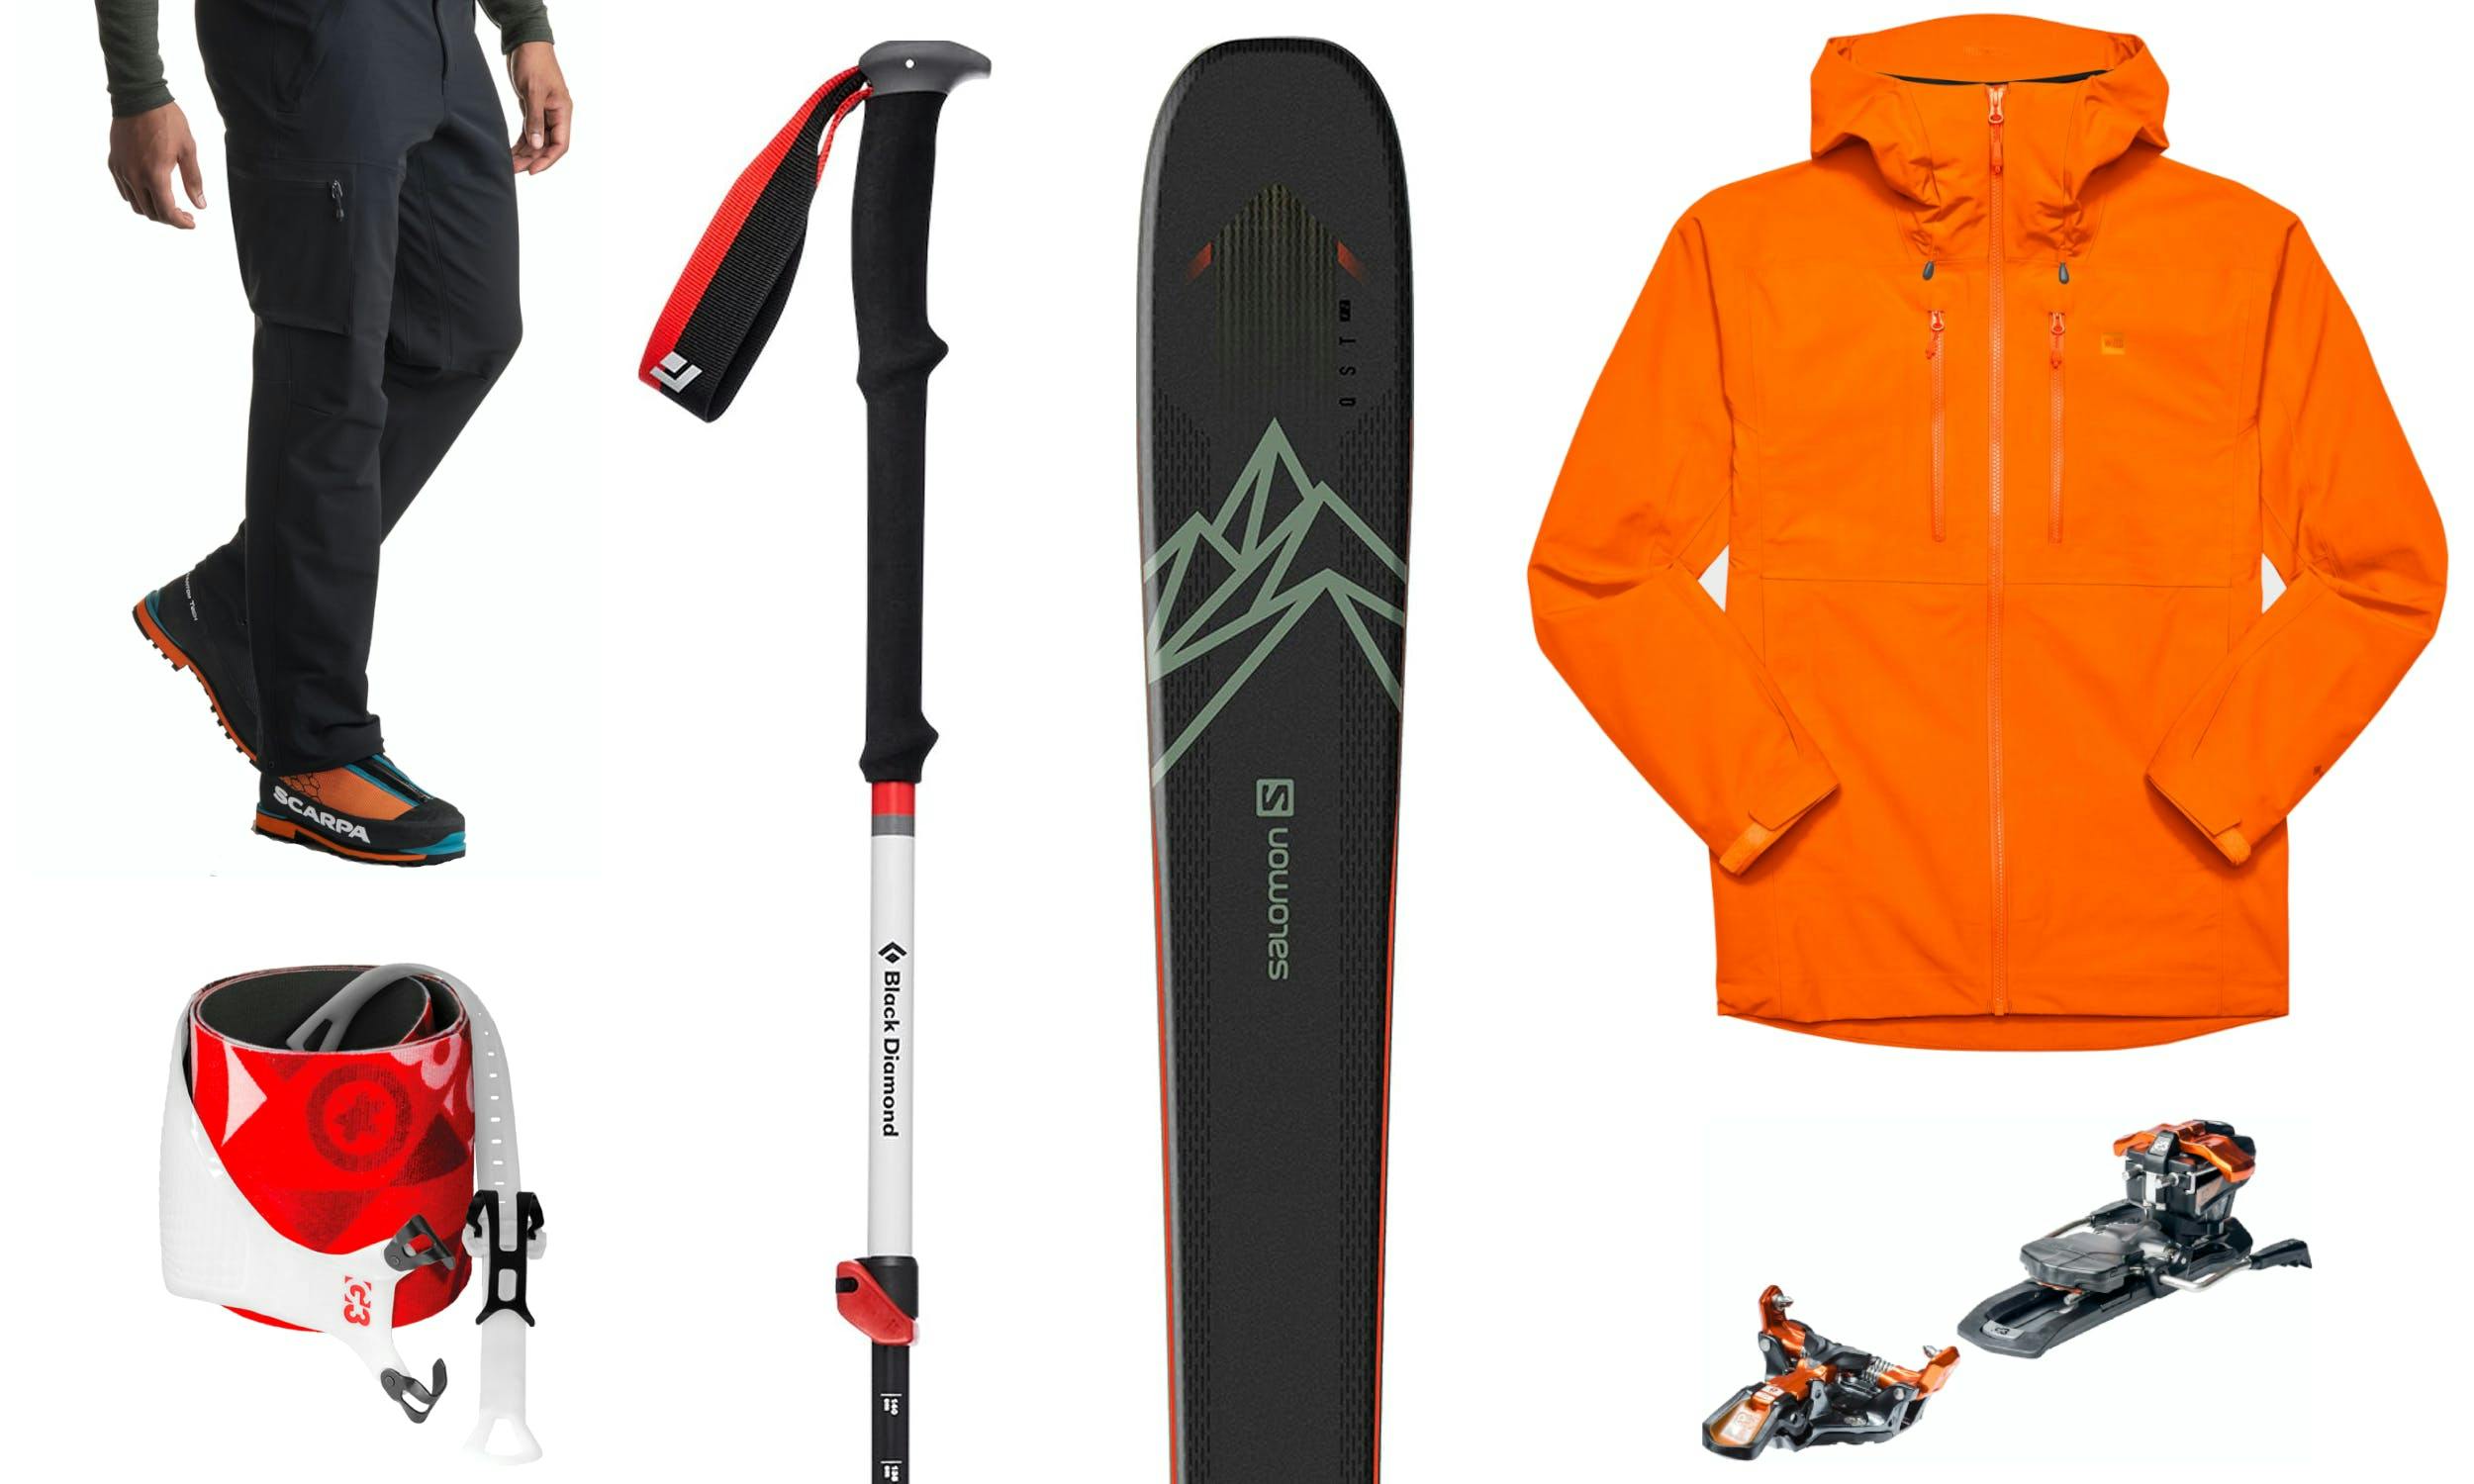 Collage of backcountry ski gear